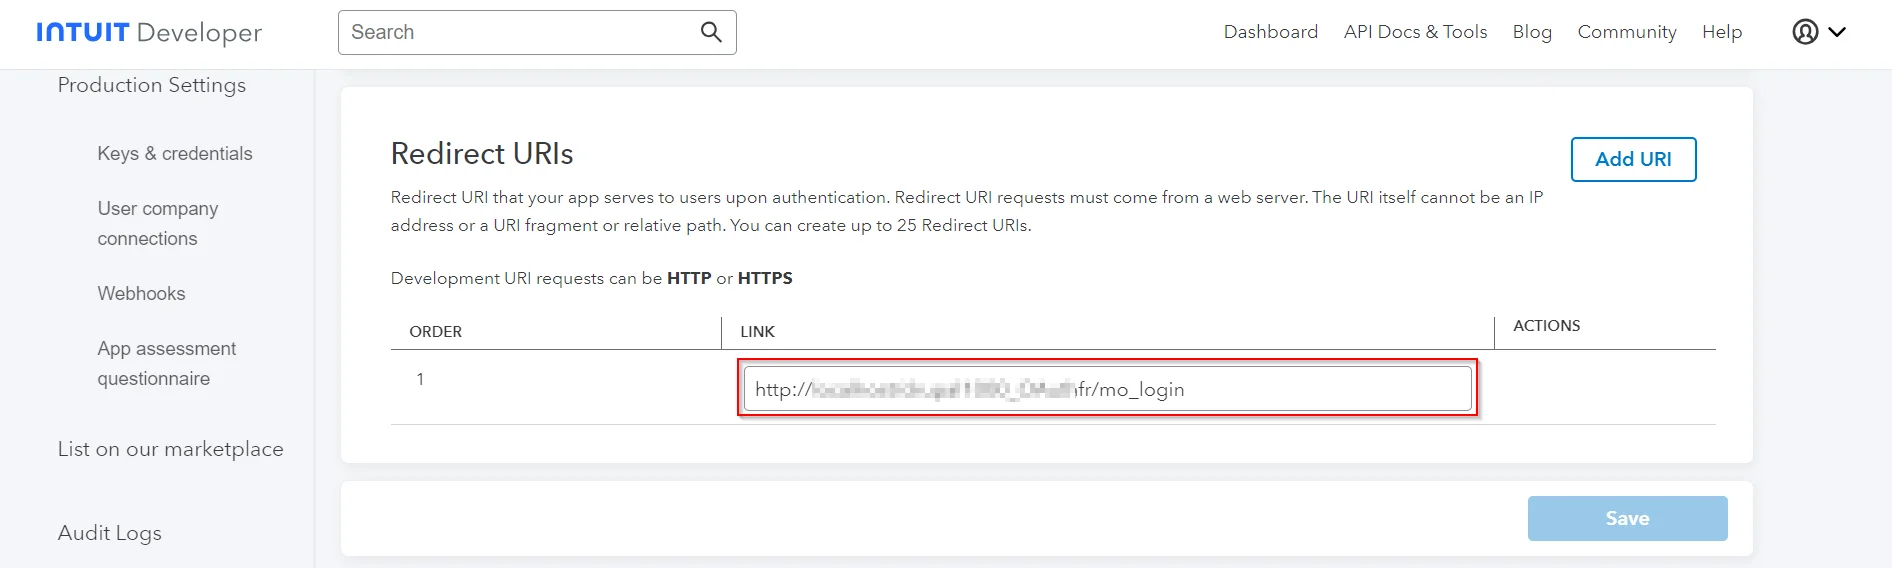 Intuit as OAuth Provider Single Sign-On - Paste the Callback URL into Redirect URIs field